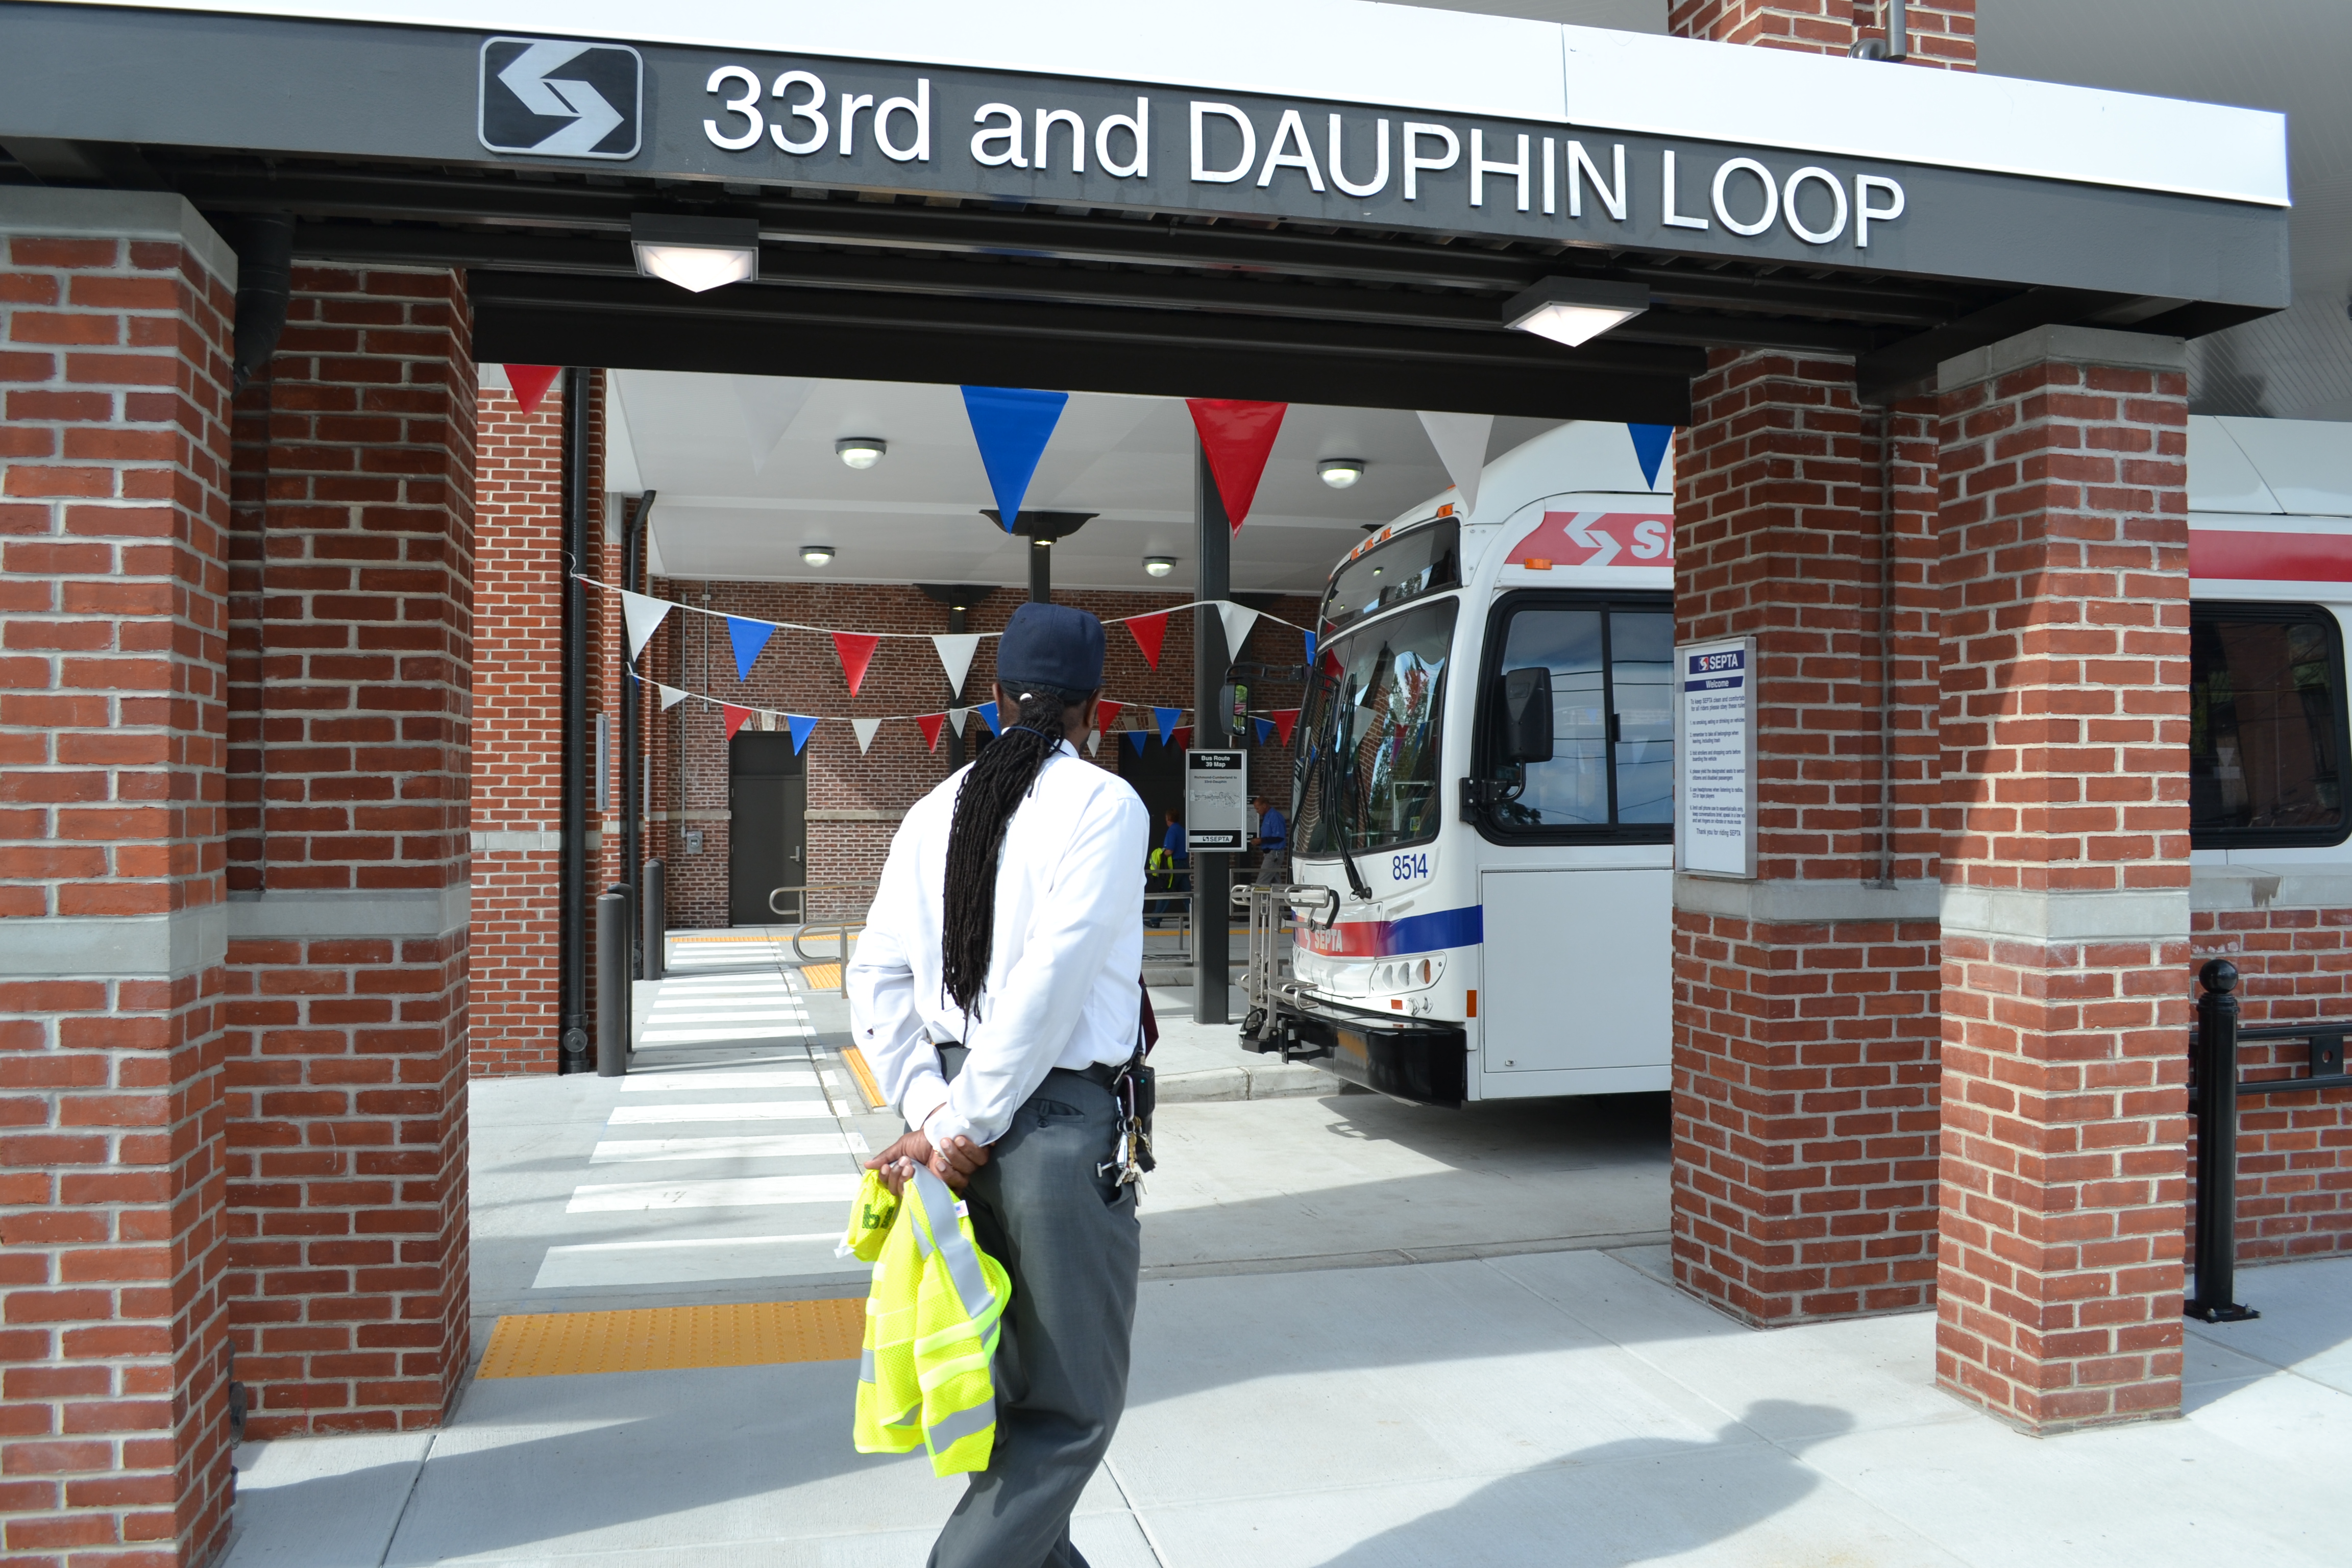 A SEPTA employee stood in a gateway into the bus loop